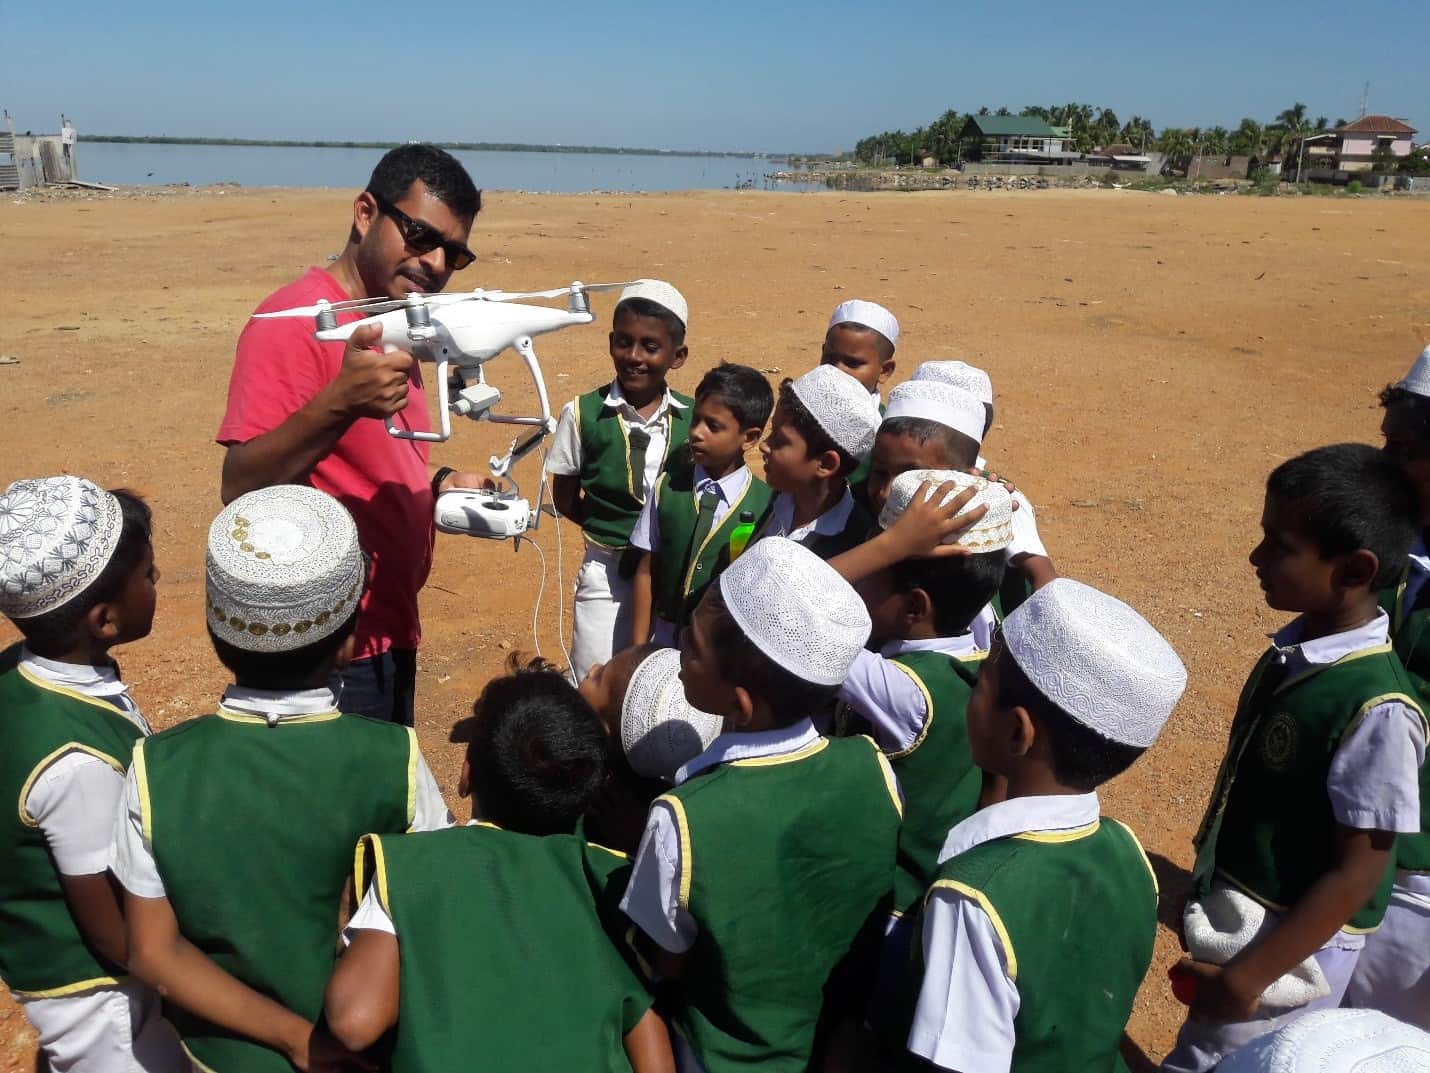 A man shows a group of school boys a drone